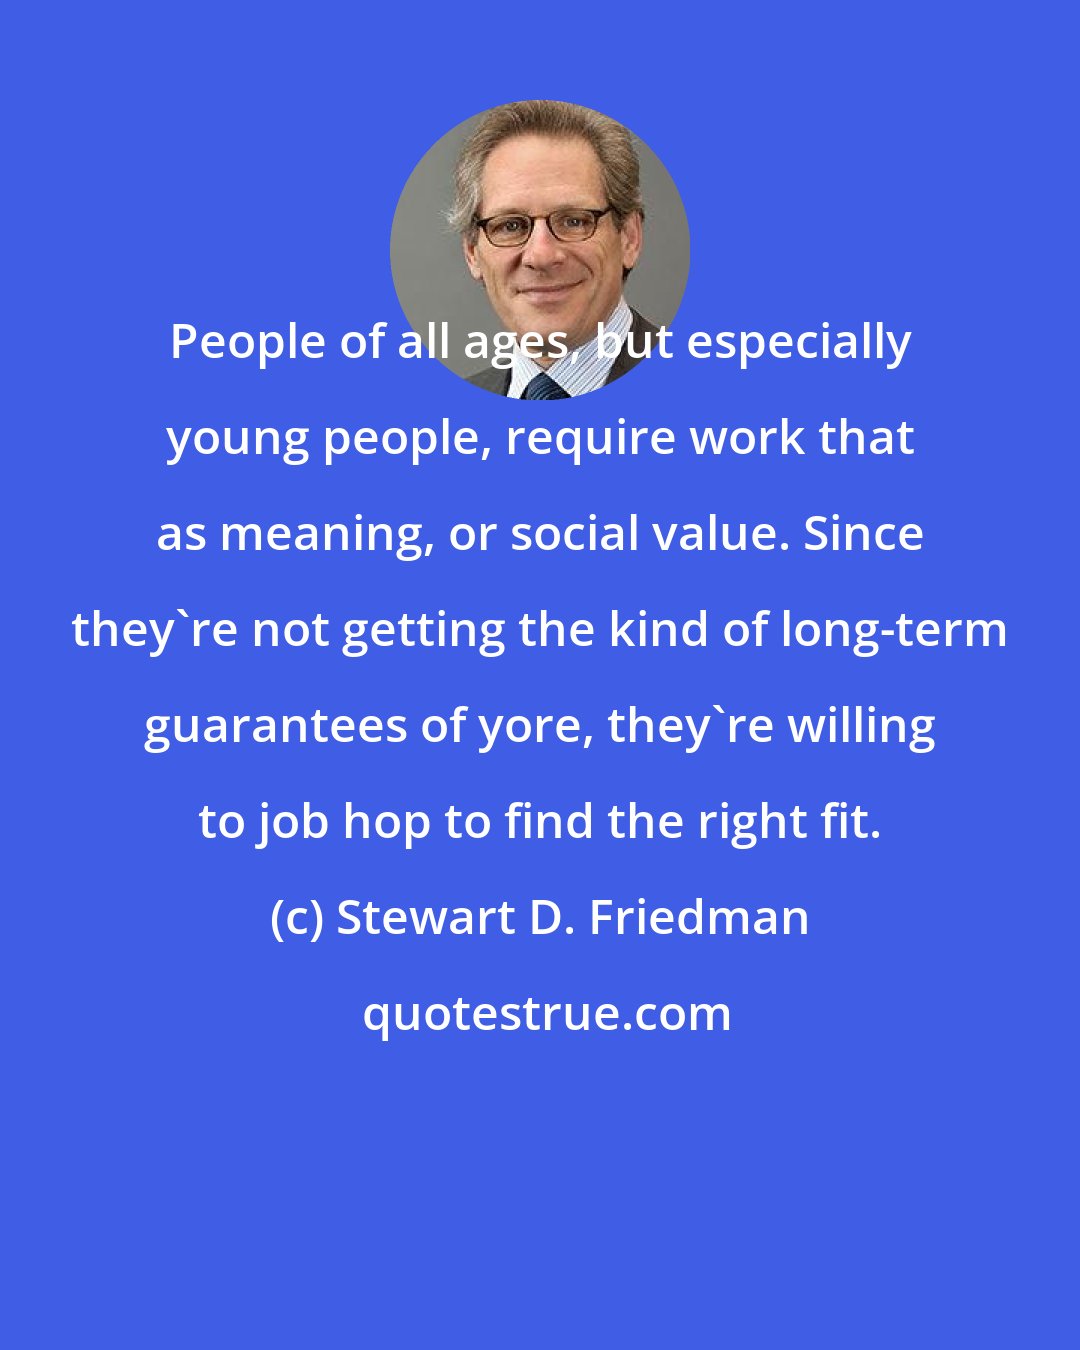 Stewart D. Friedman: People of all ages, but especially young people, require work that as meaning, or social value. Since they're not getting the kind of long-term guarantees of yore, they're willing to job hop to find the right fit.